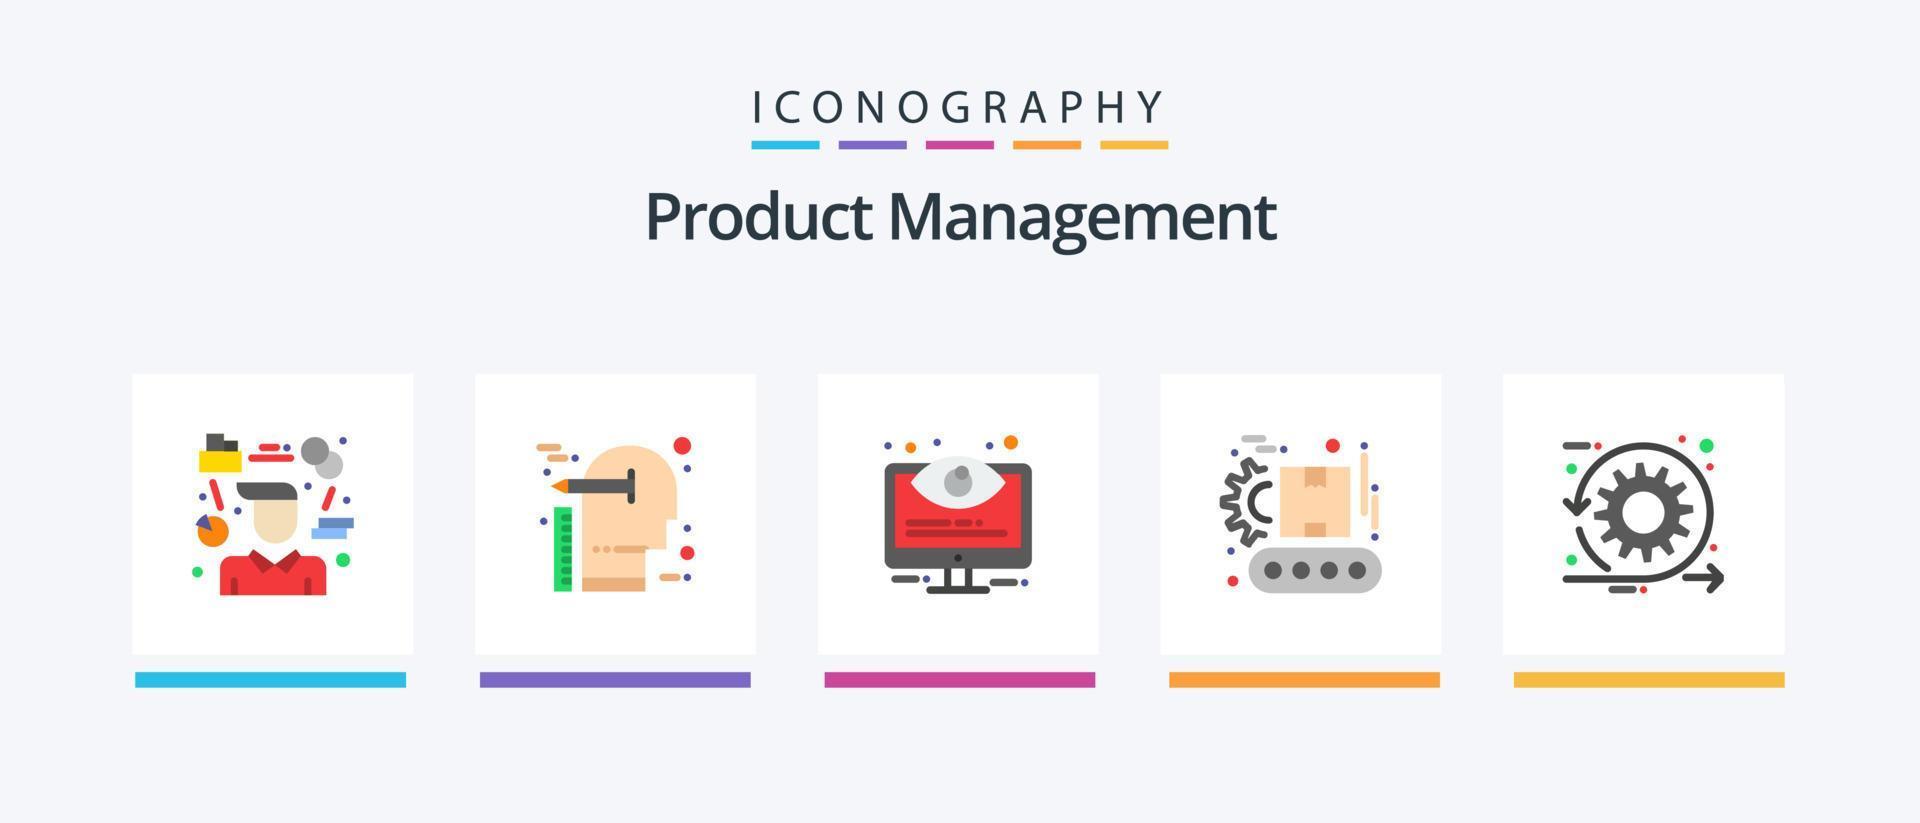 Product Management Flat 5 Icon Pack Including manufacturing. conveyor. scale. system. monitoring. Creative Icons Design vector